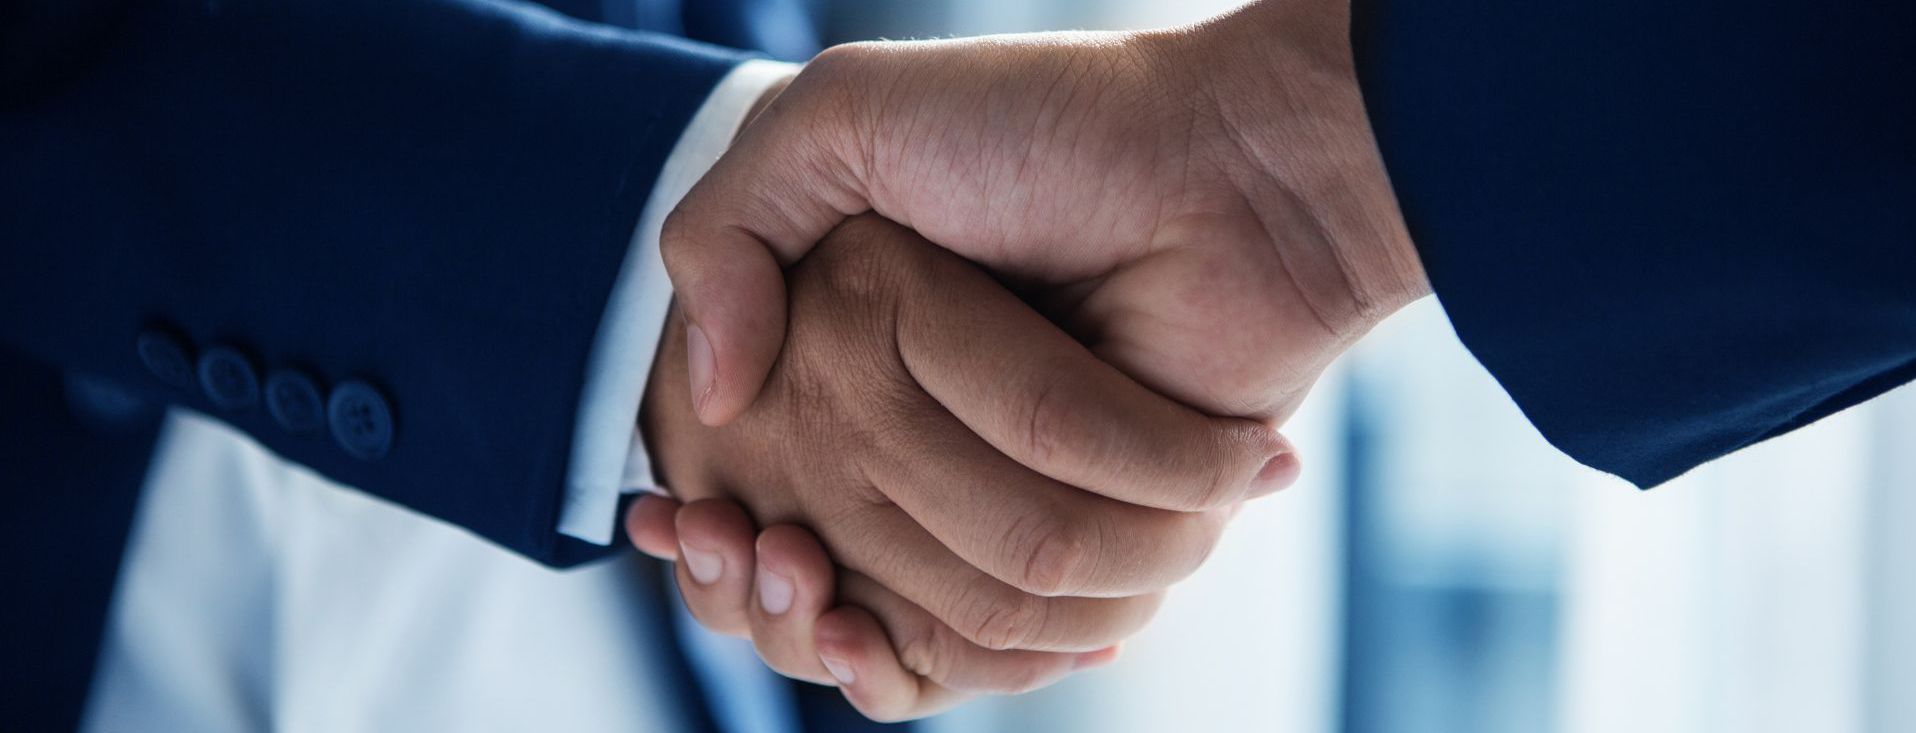 close-up of a handshake between two businesspeople